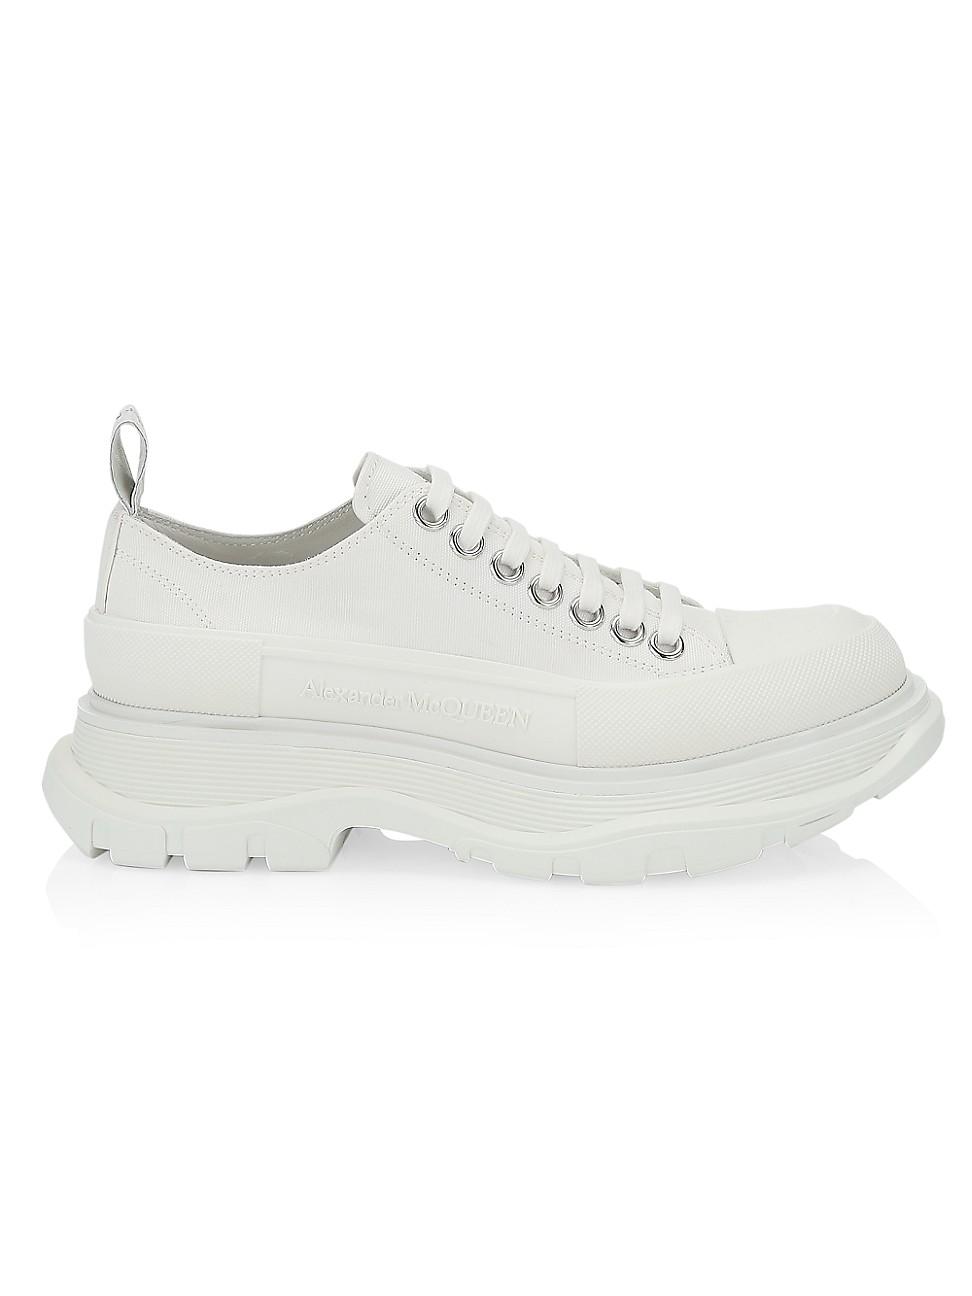 Alexander McQueen Chunky Leather Platform Sneakers in White - Lyst